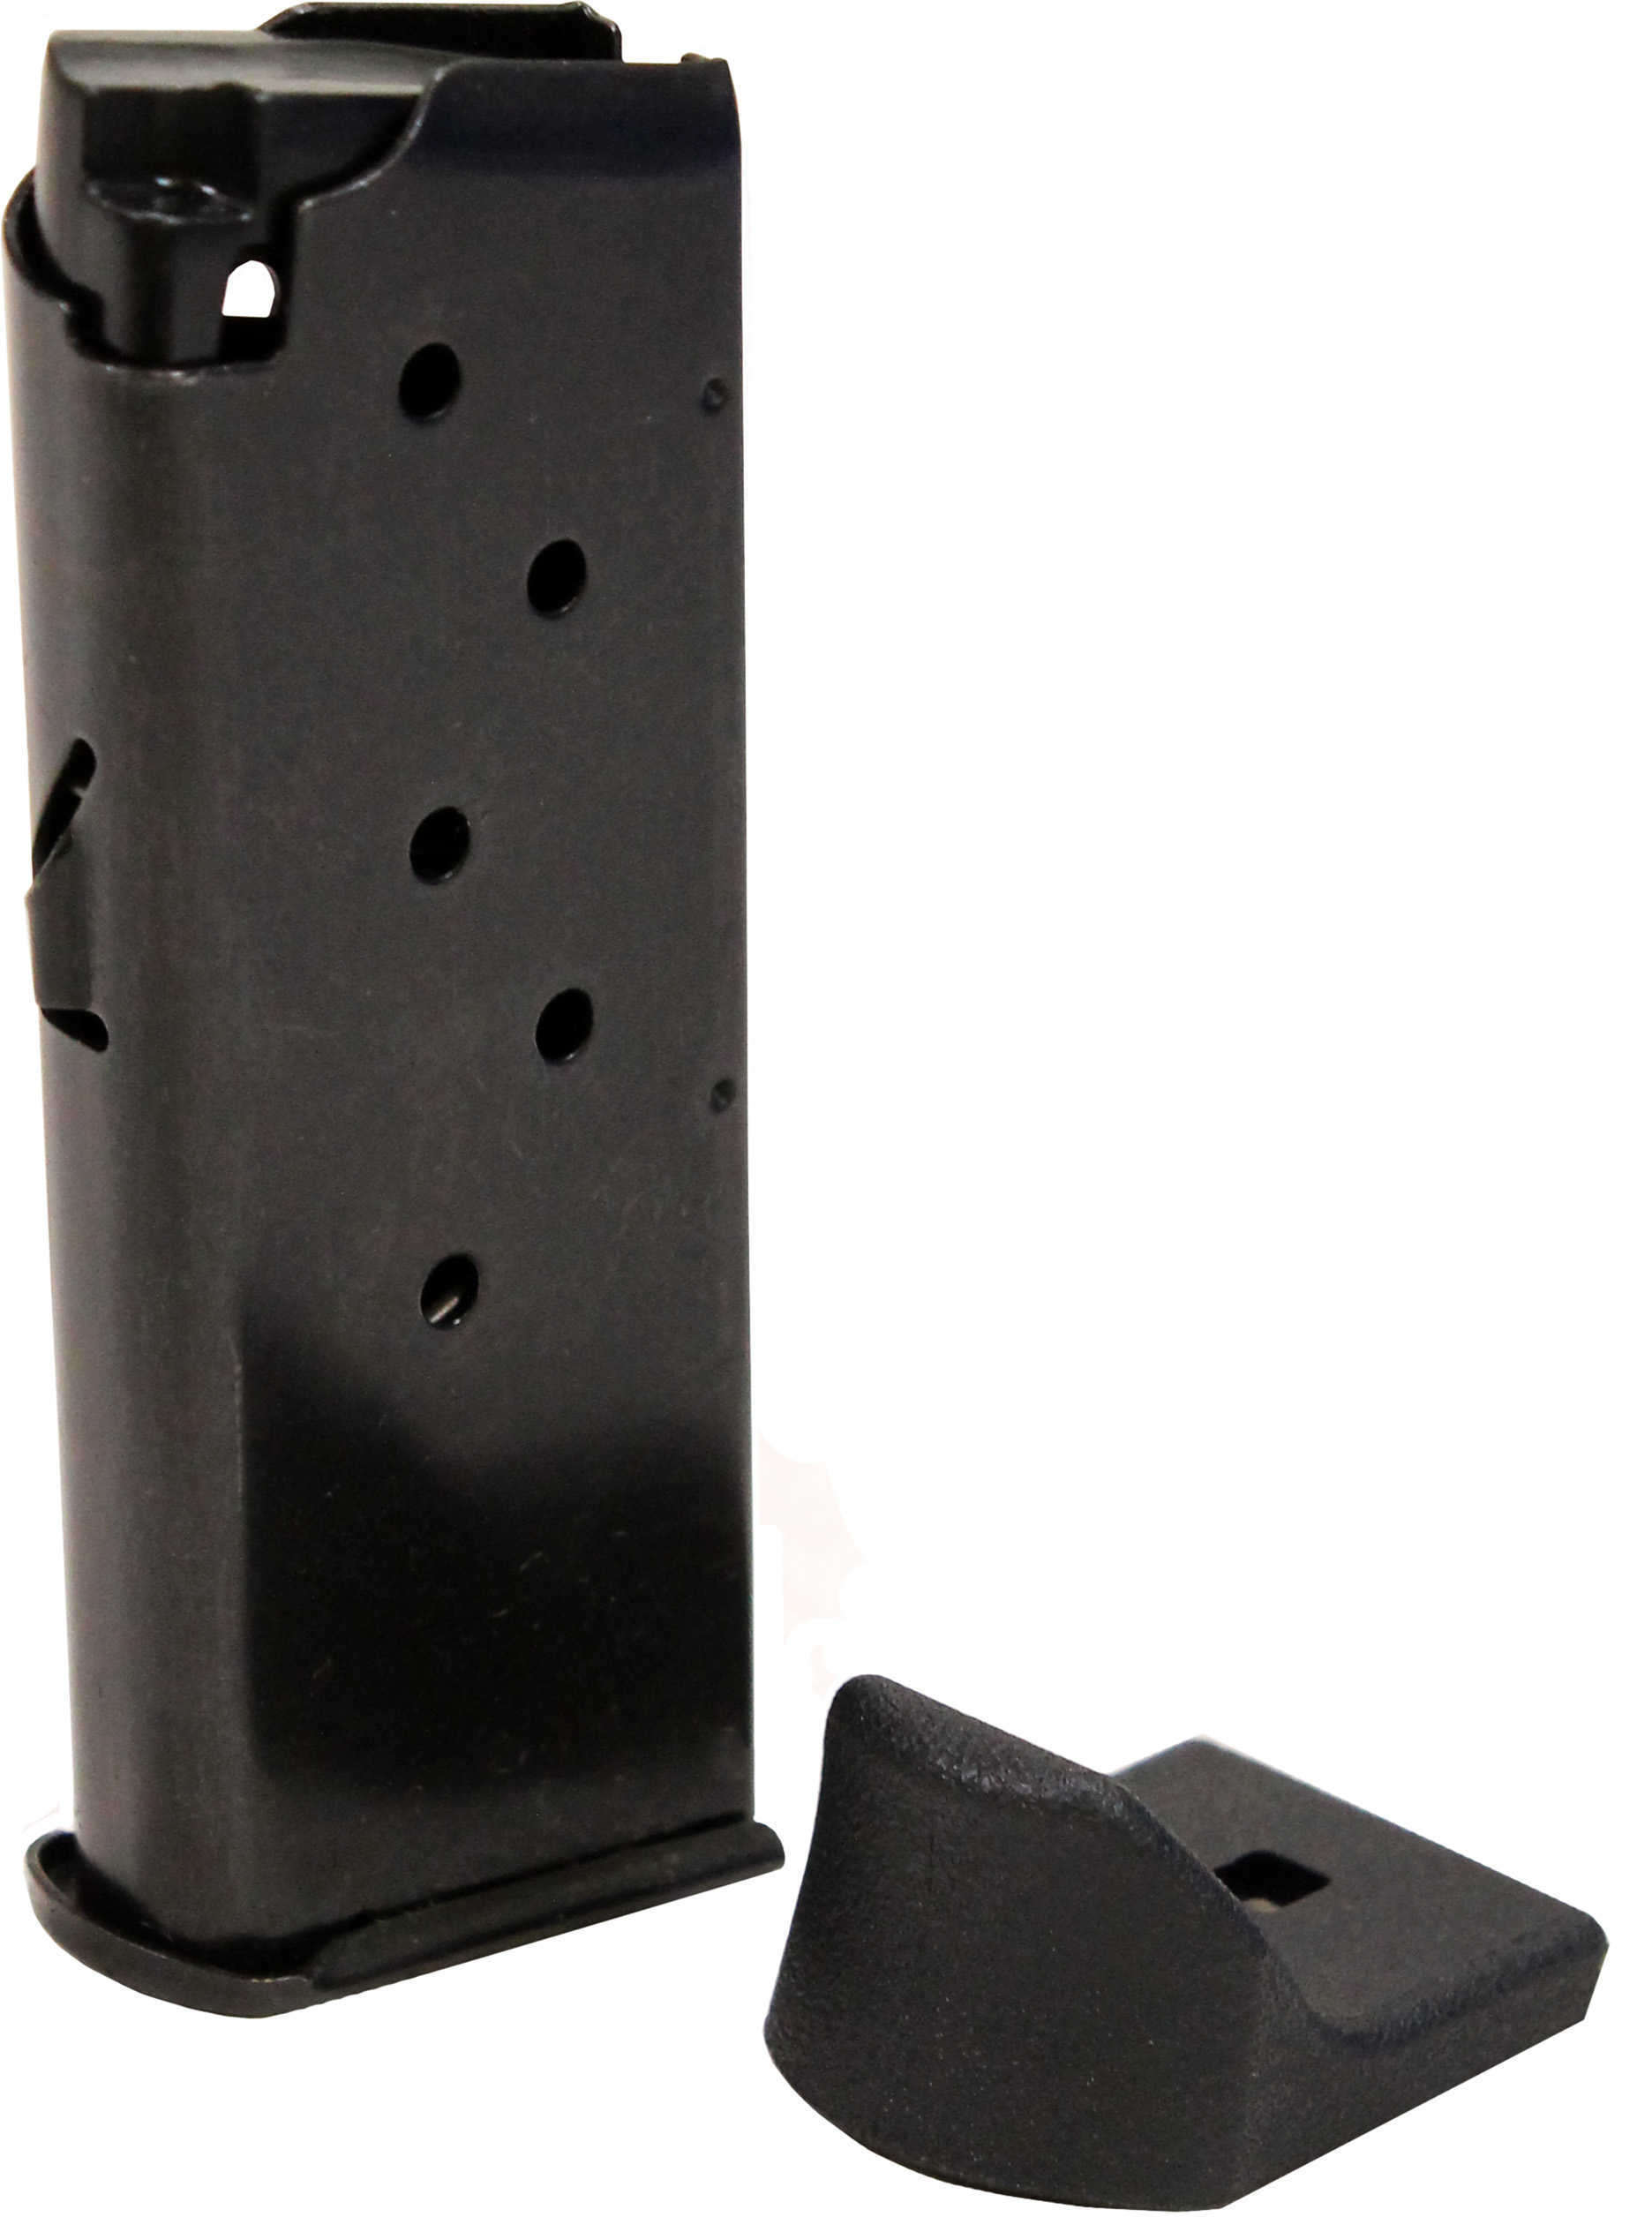 Remington RM380 Magazine 380 ACP 6 Rounds with Finger Extension Black Finish